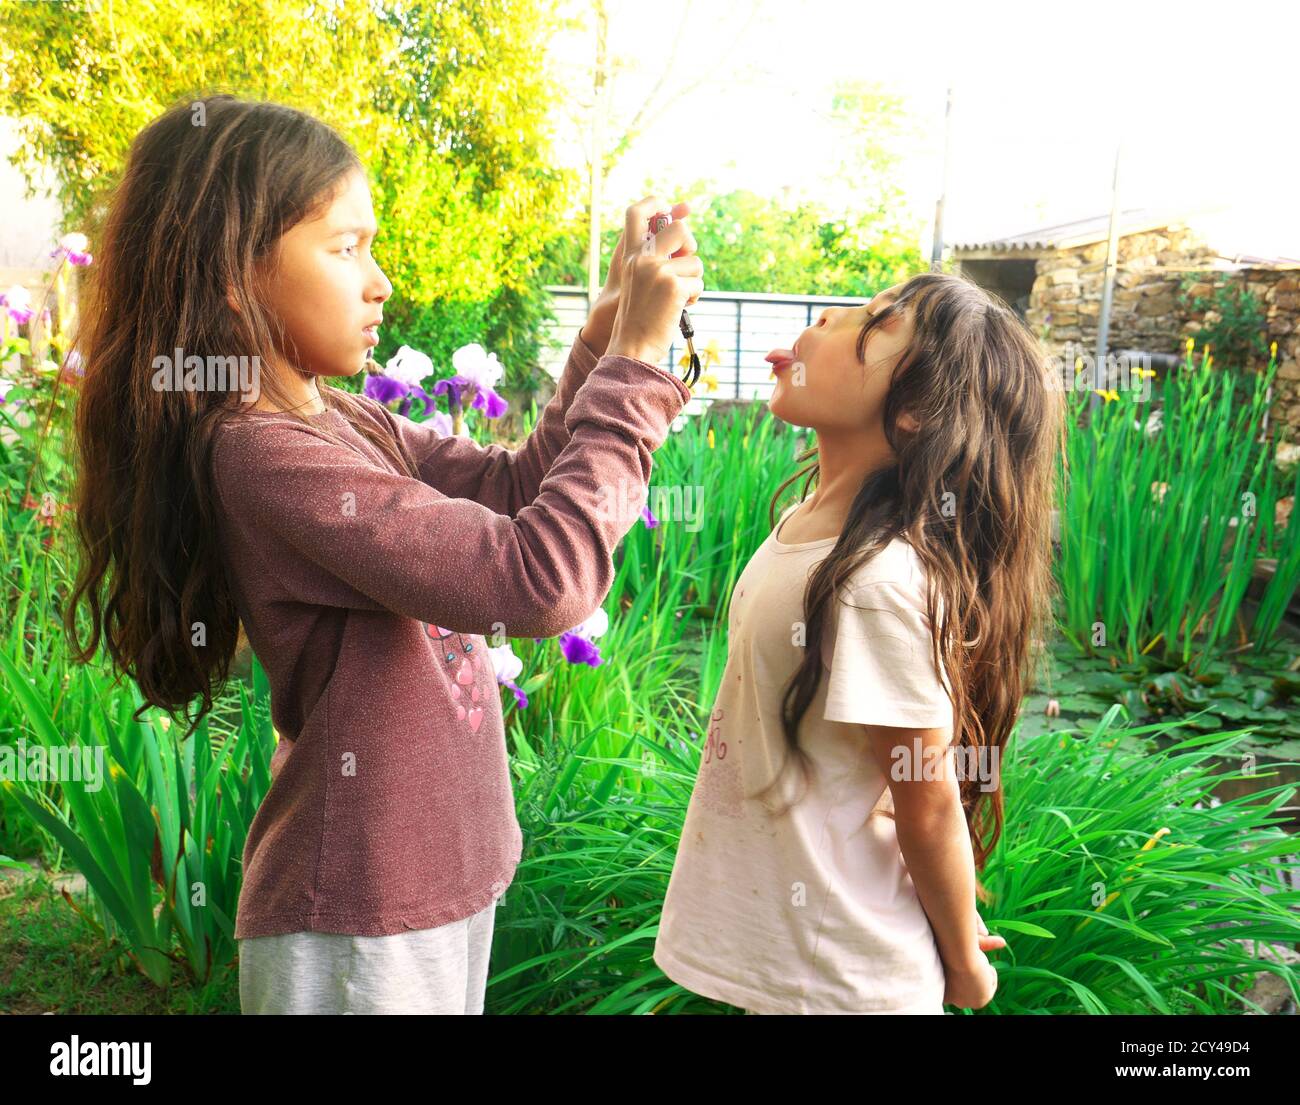 Little girl making a grimace while her older sister takes her picture. Stock Photo